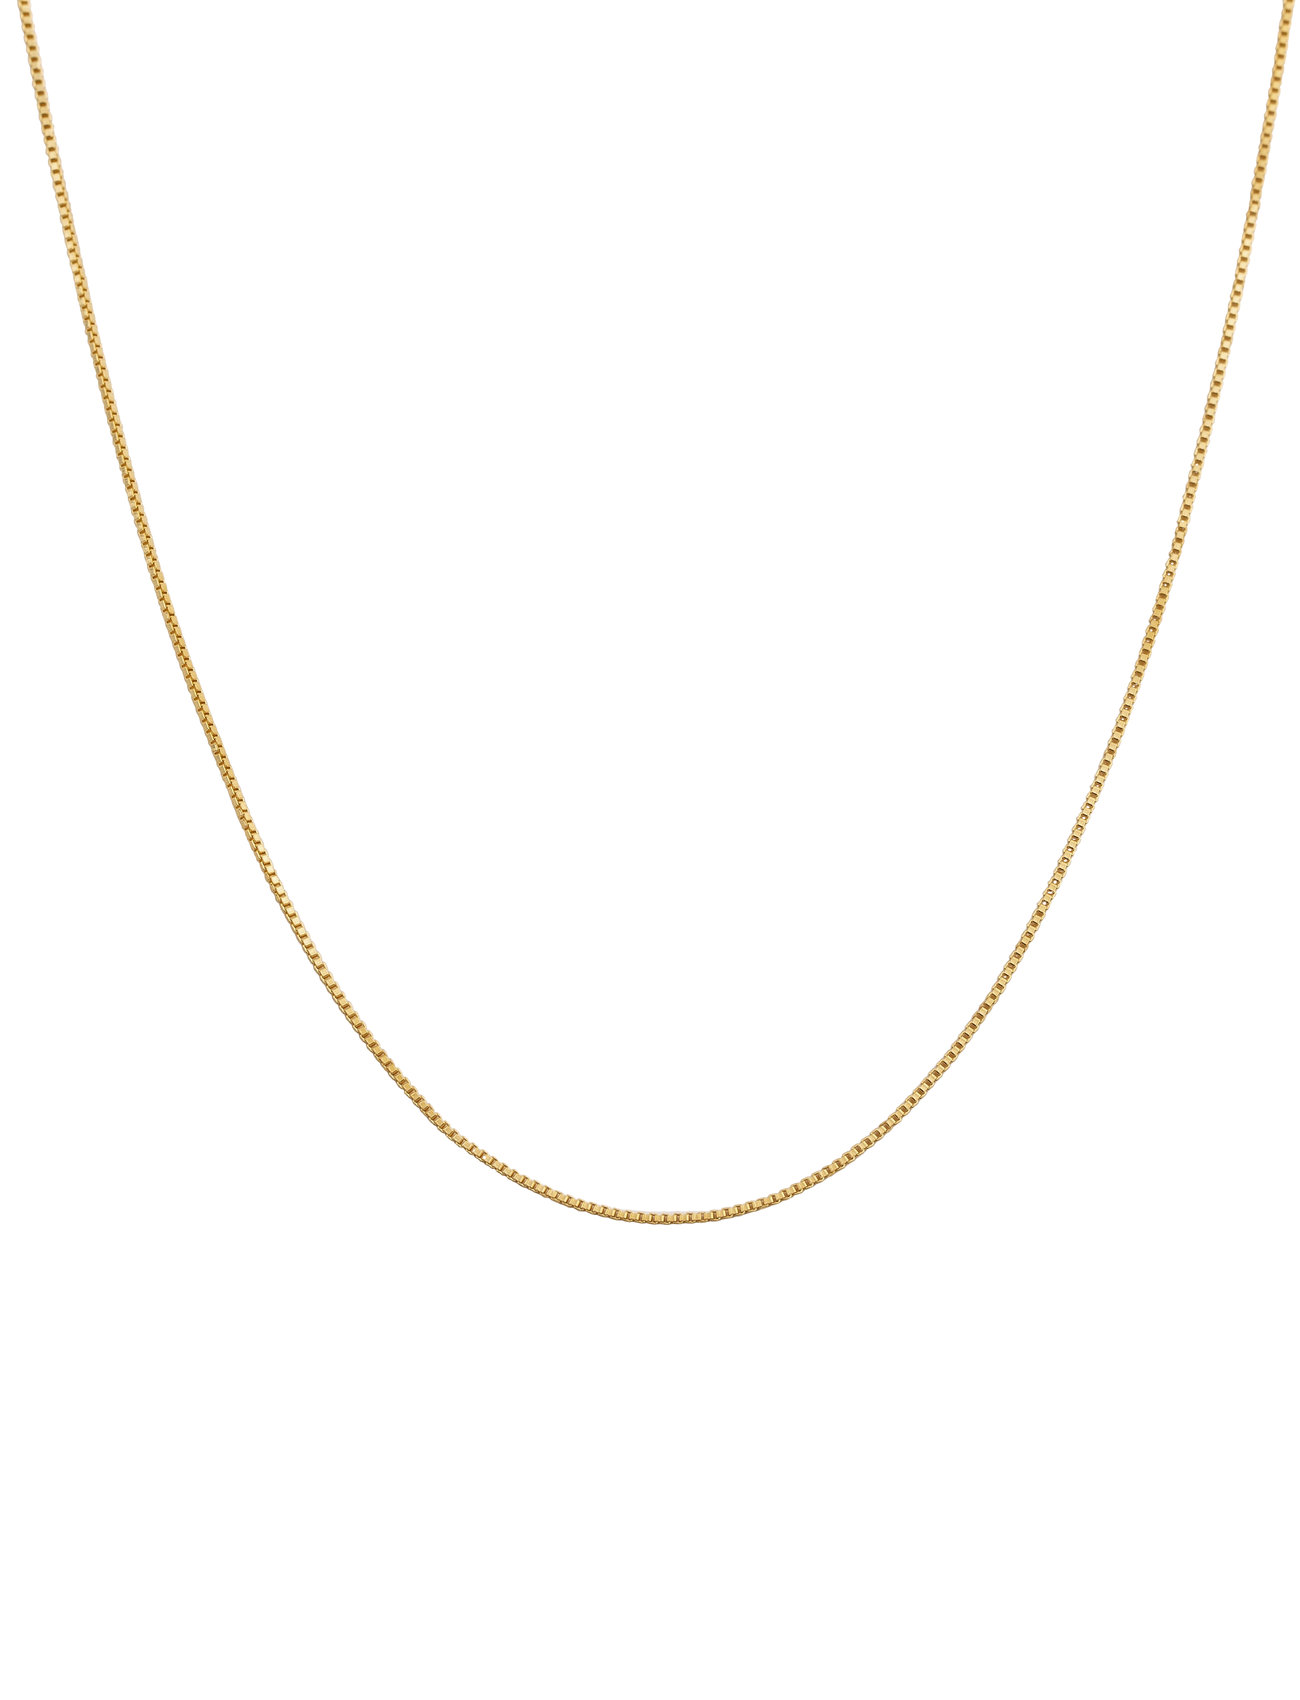 Beloved Chain Short Gold Accessories Jewellery Necklaces Chain Necklaces Gold Syster P